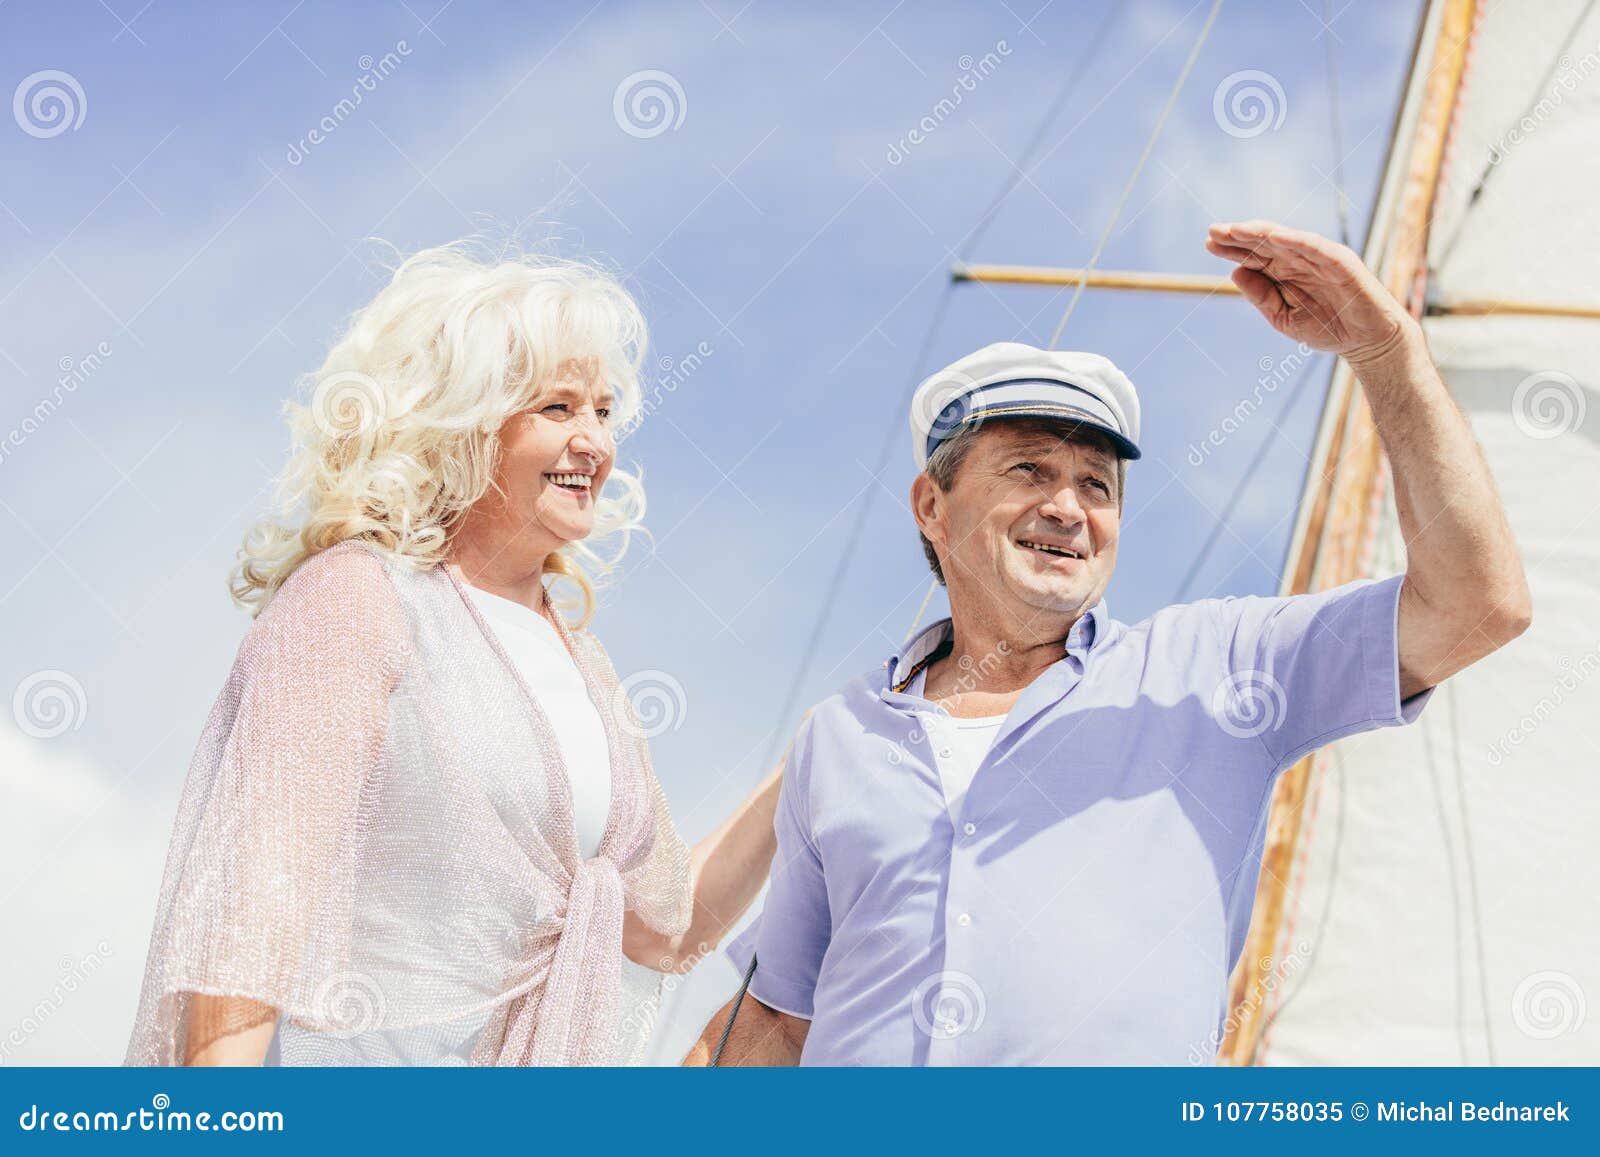 Older Couple Standing On A Yacht Stock Image Image Of Love Luxurious 